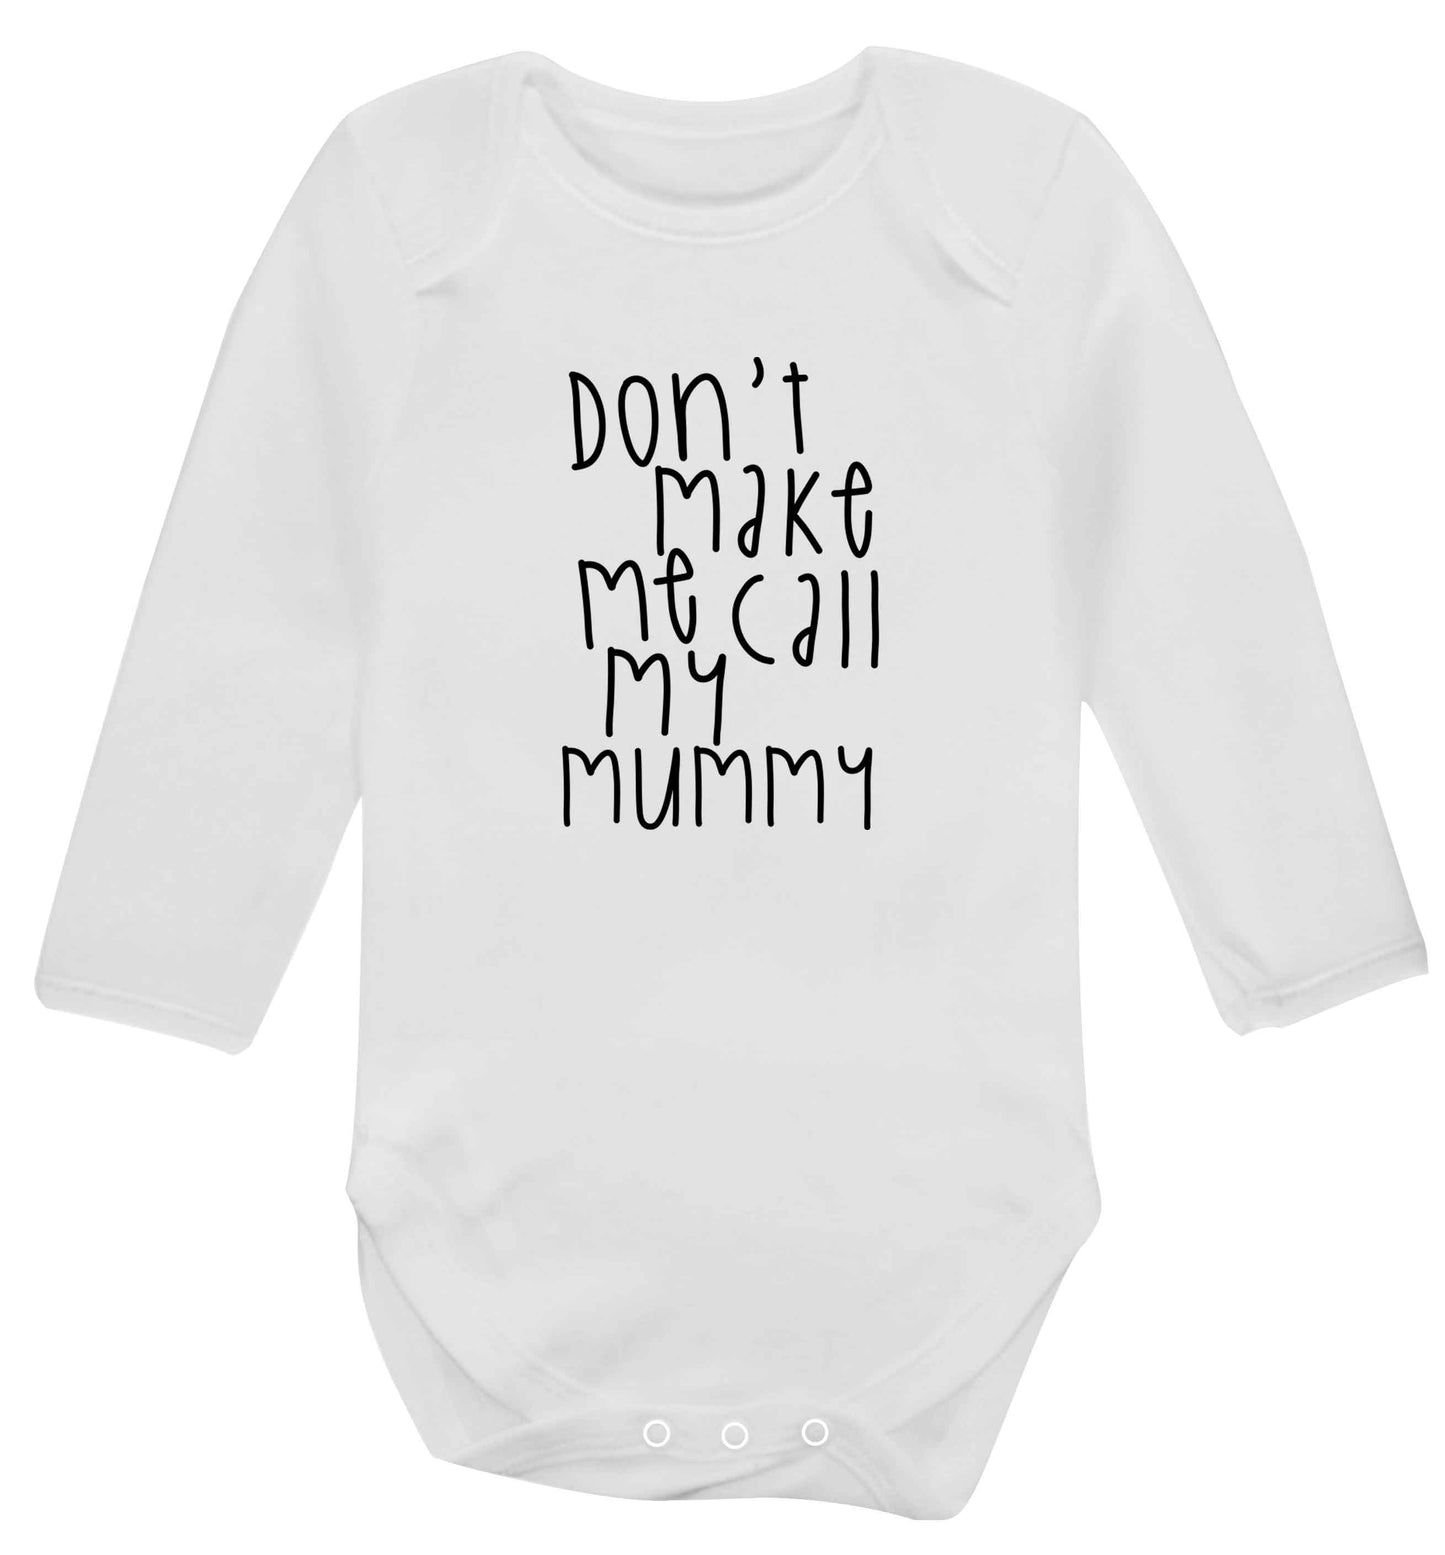 Don't make me call my mummy baby vest long sleeved white 6-12 months